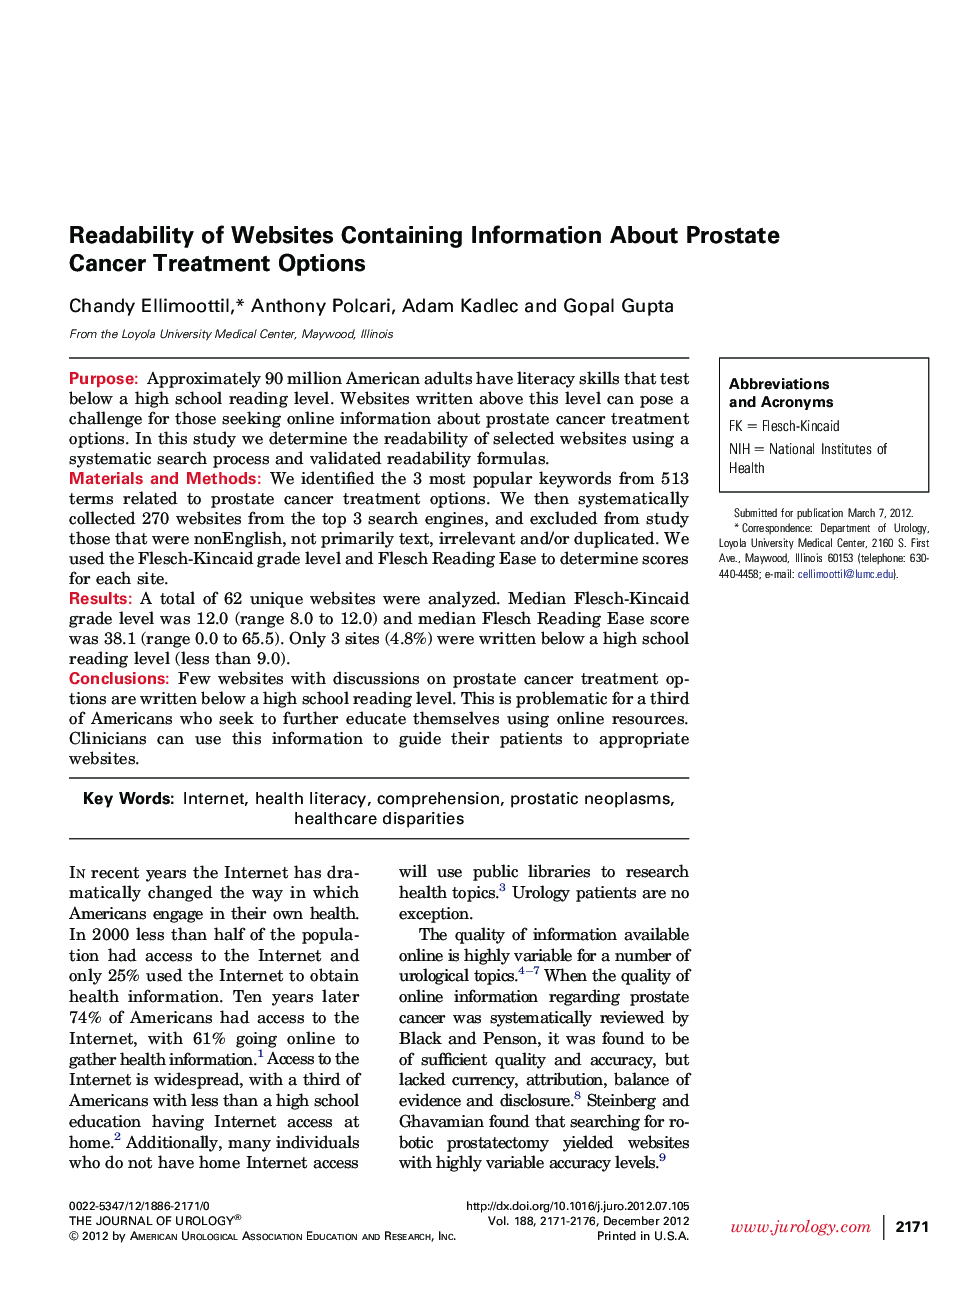 Readability of Websites Containing Information About Prostate Cancer Treatment Options